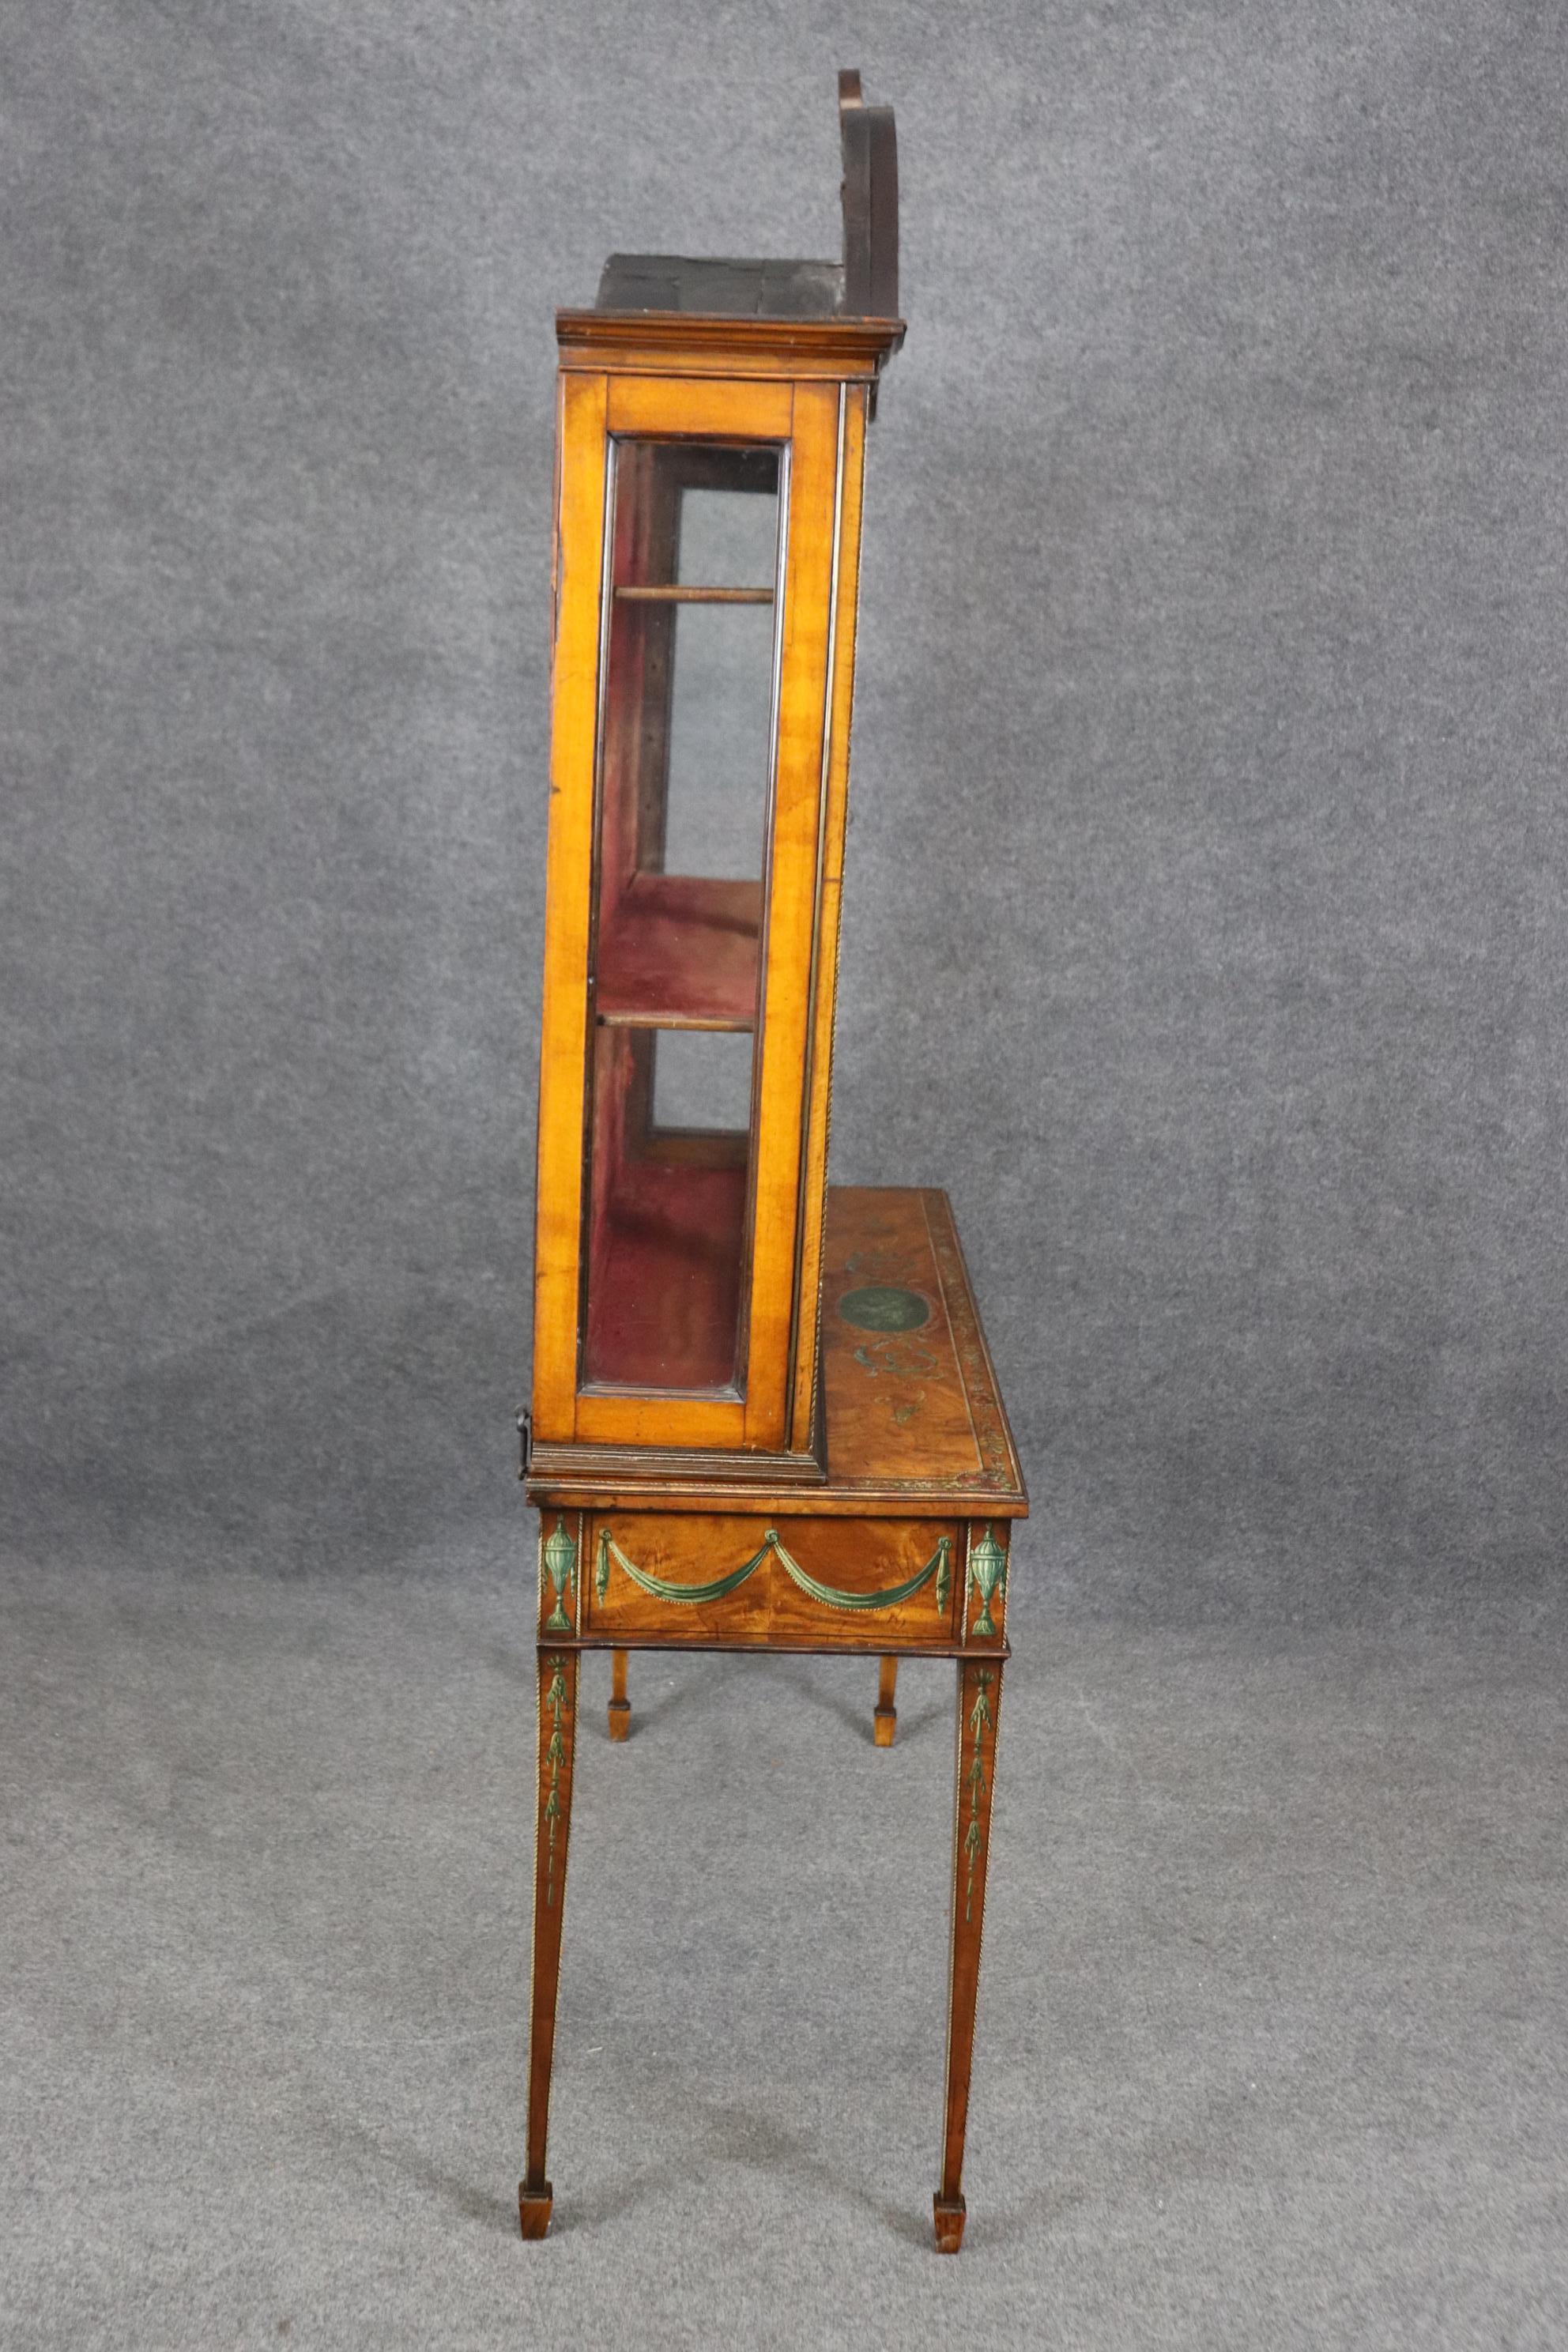 Dimensions: Height: 82 in Width: 48in Depth: 17 1/2 in 

This antique 19th century English Adams style curio cabinet vitrine is made of the highest quality! If you look at the photos provided, you will see the beautiful ornate paint decoration